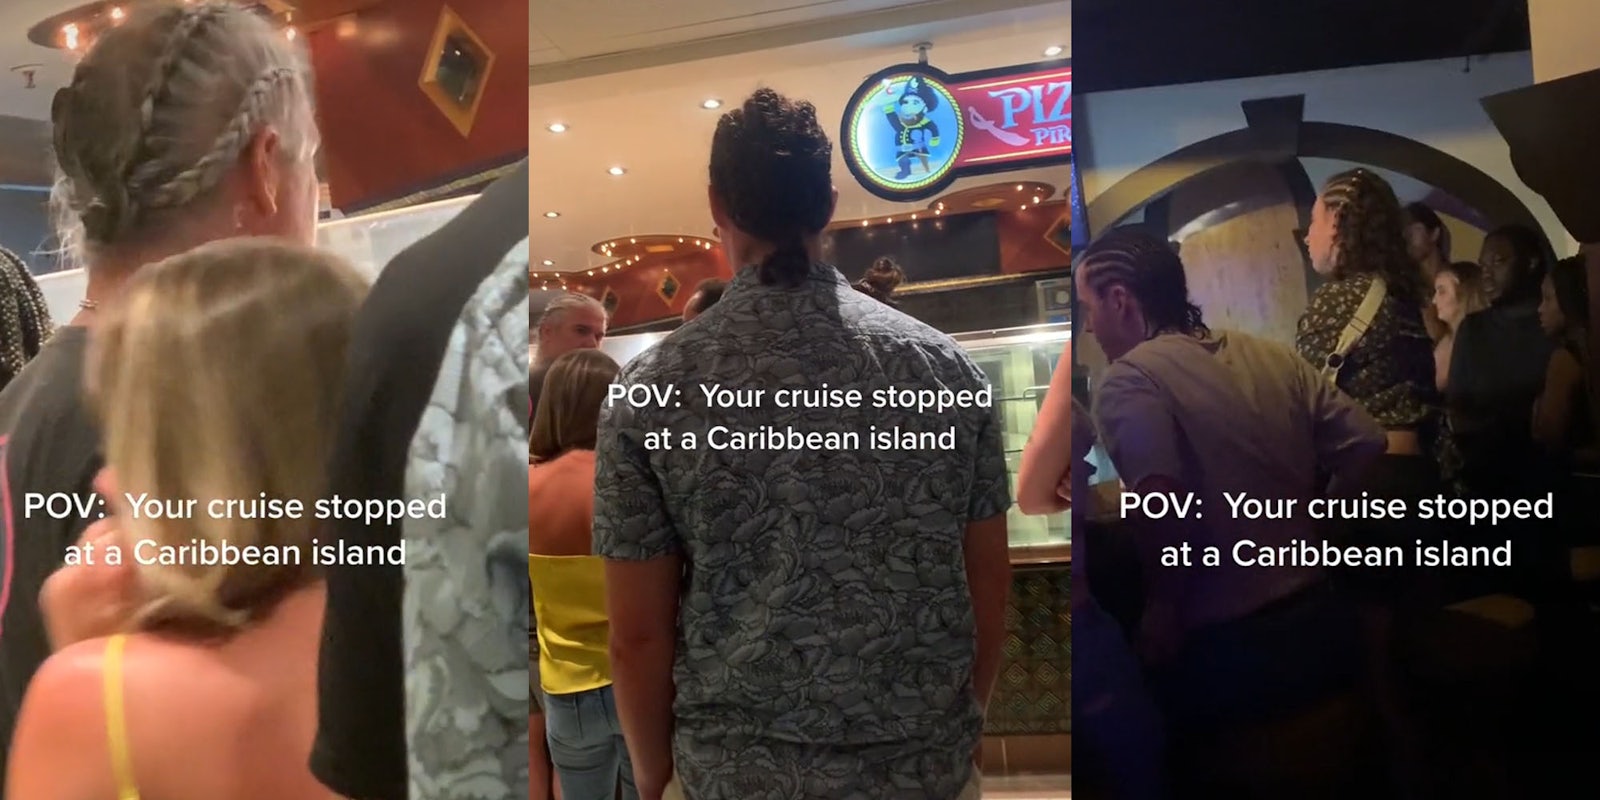 White man with gray hair and braids in group of people caption 'POV: Your cruise stopped at a Caribbean island' (l) White man with dark hair and hair braided with couple in front of him caption 'POV: Your cruise stopped at a Caribbean island' (c) White man with dark hair and white woman next to him at bar with braids and people staring at them caption 'POV: Your cruise stopped at a Caribbean island' (r)